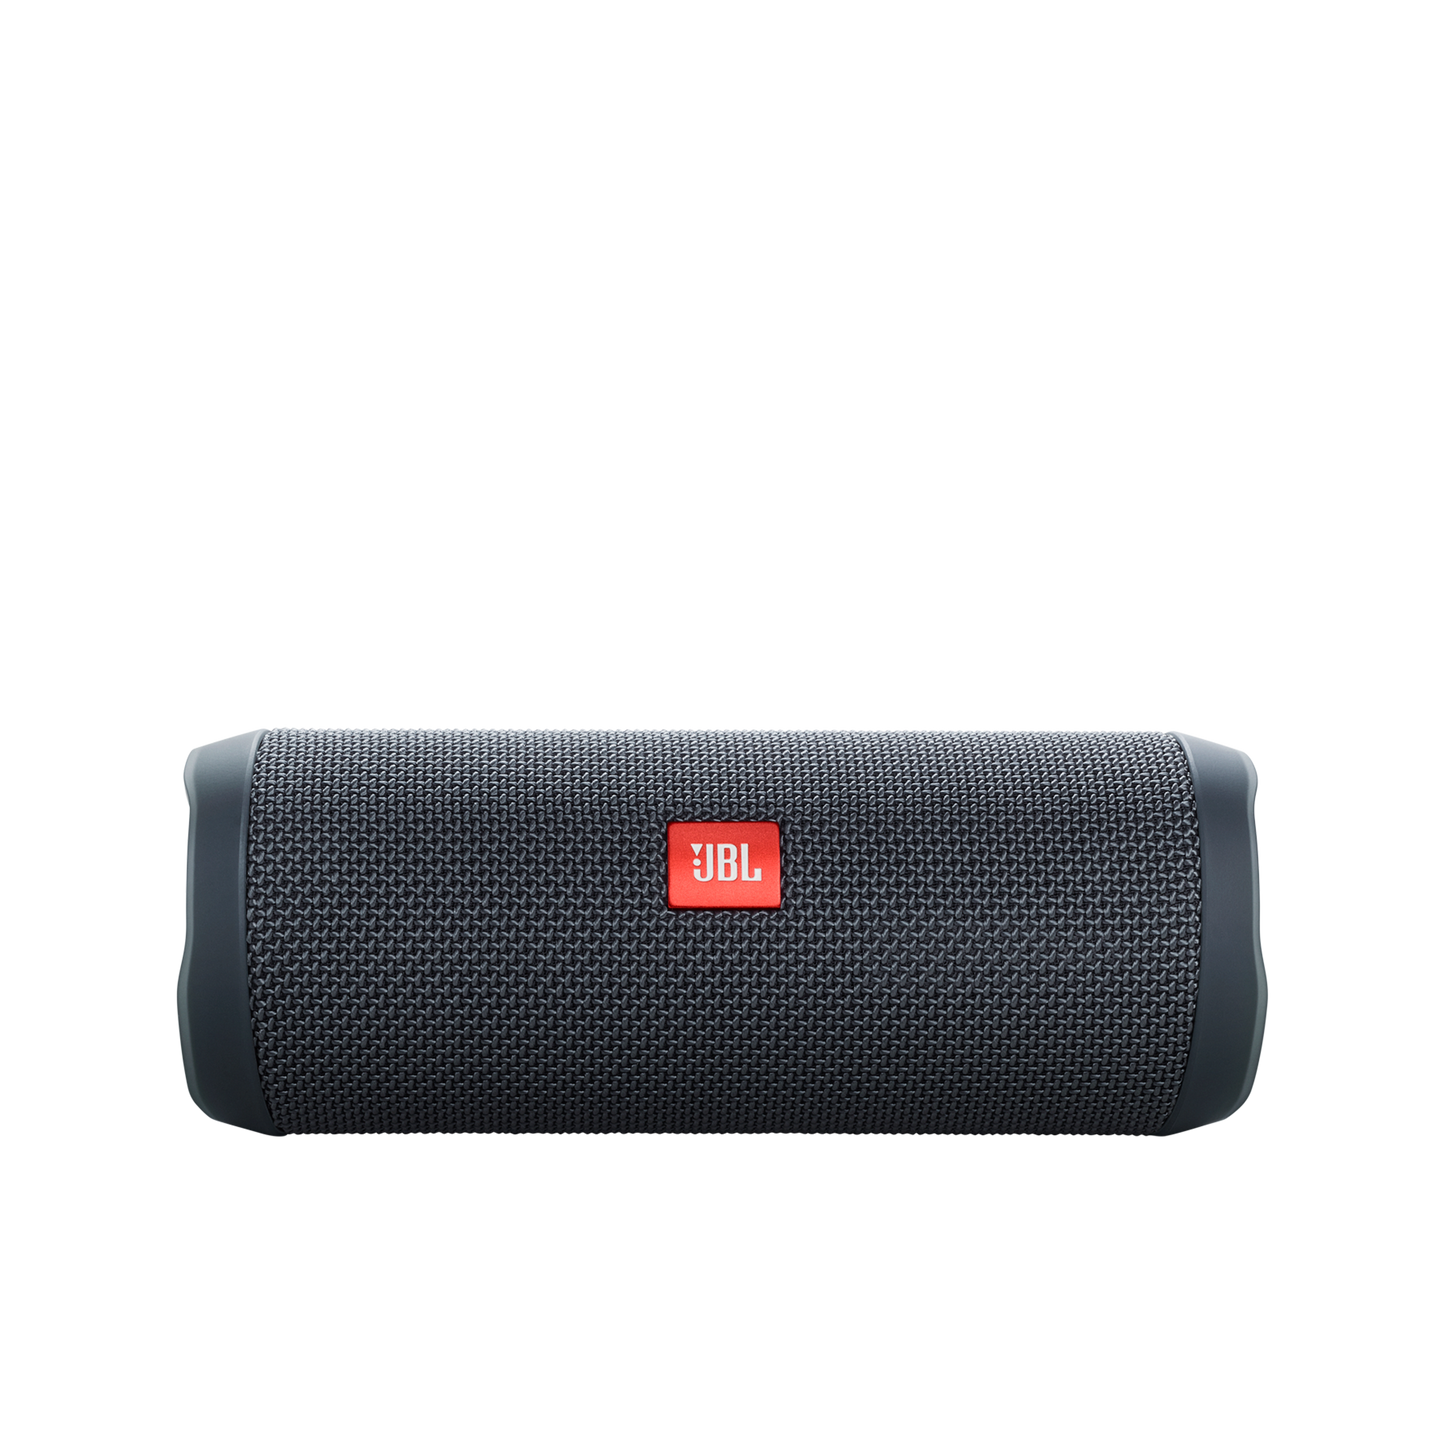 JBL Charge Essential 2 specifications